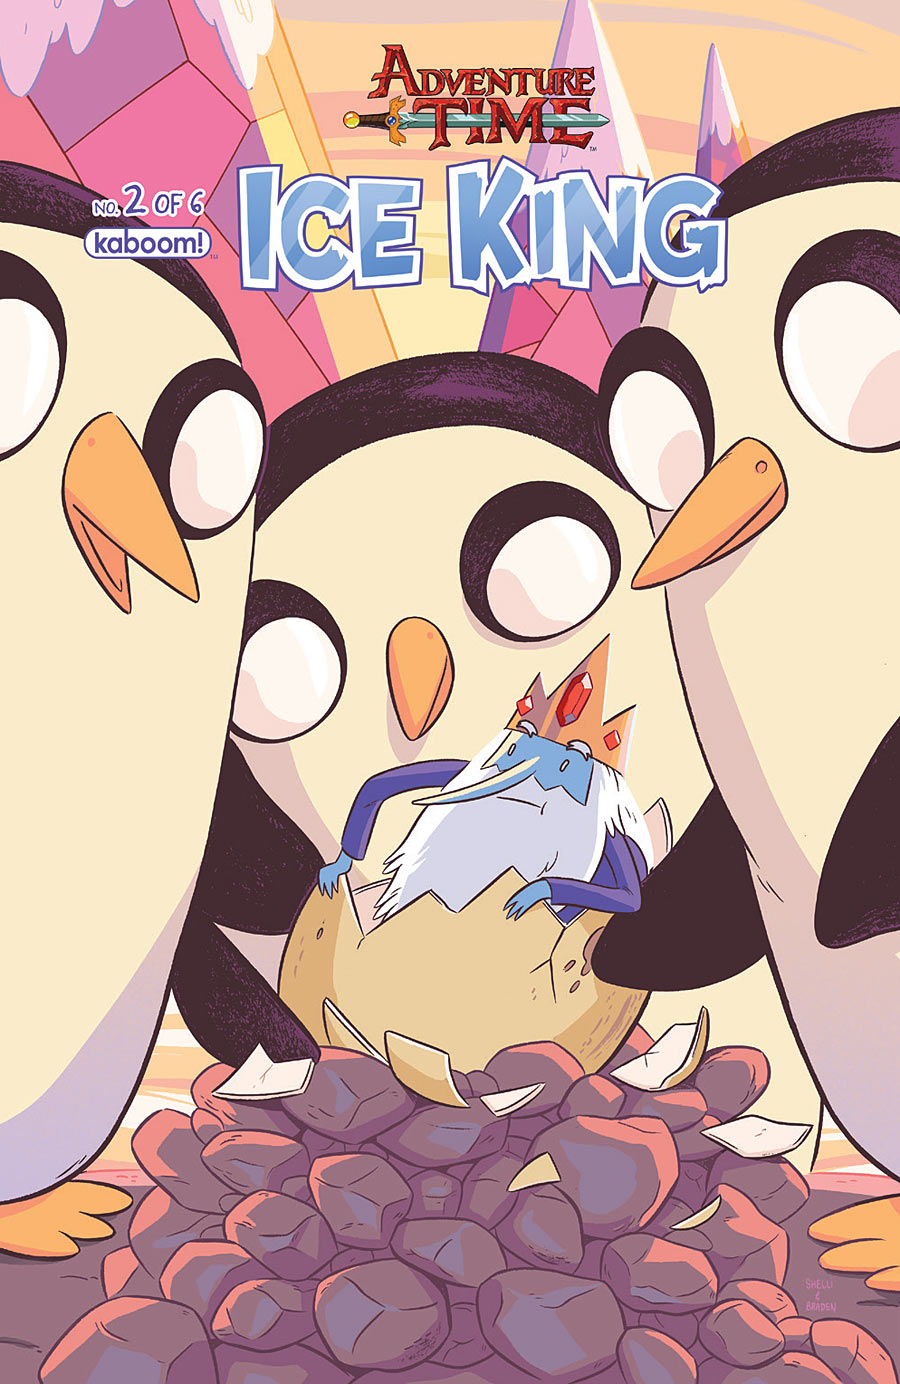 Adventure Time Ice King Issue 2 Adventure Time Wiki Fandom Powered